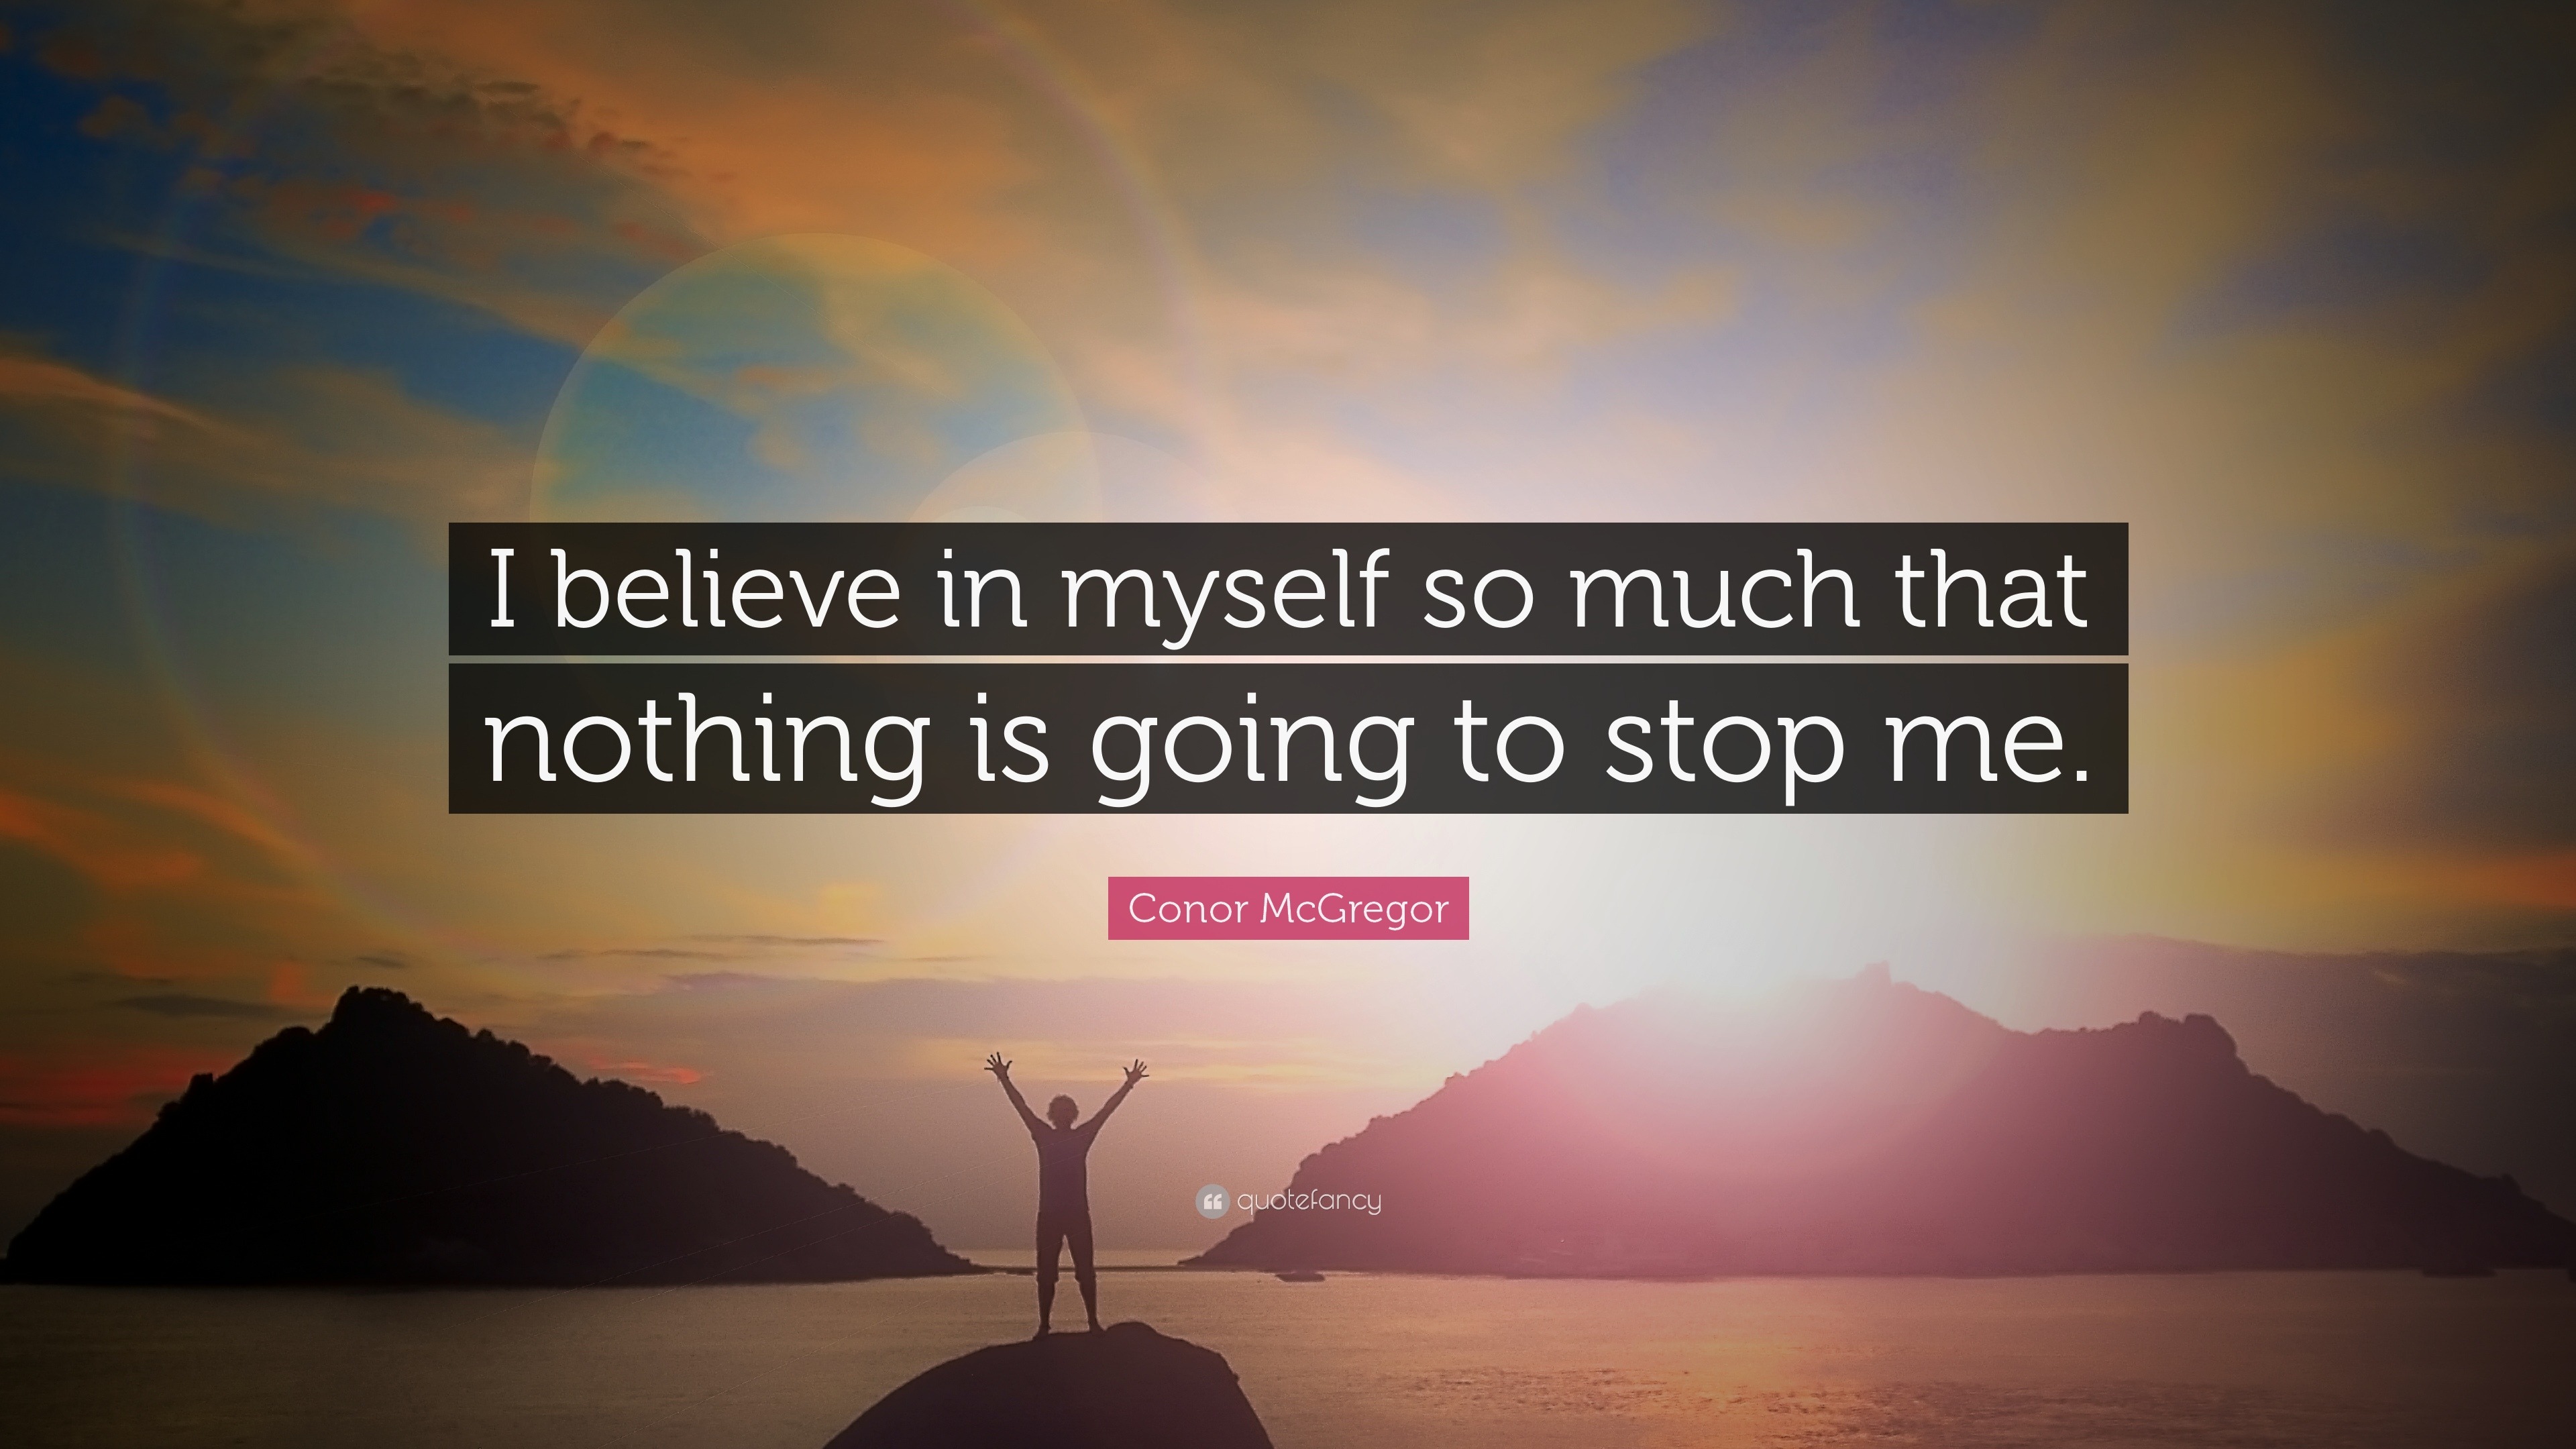 Conor McGregor Quote: “I believe in myself so much that nothing is